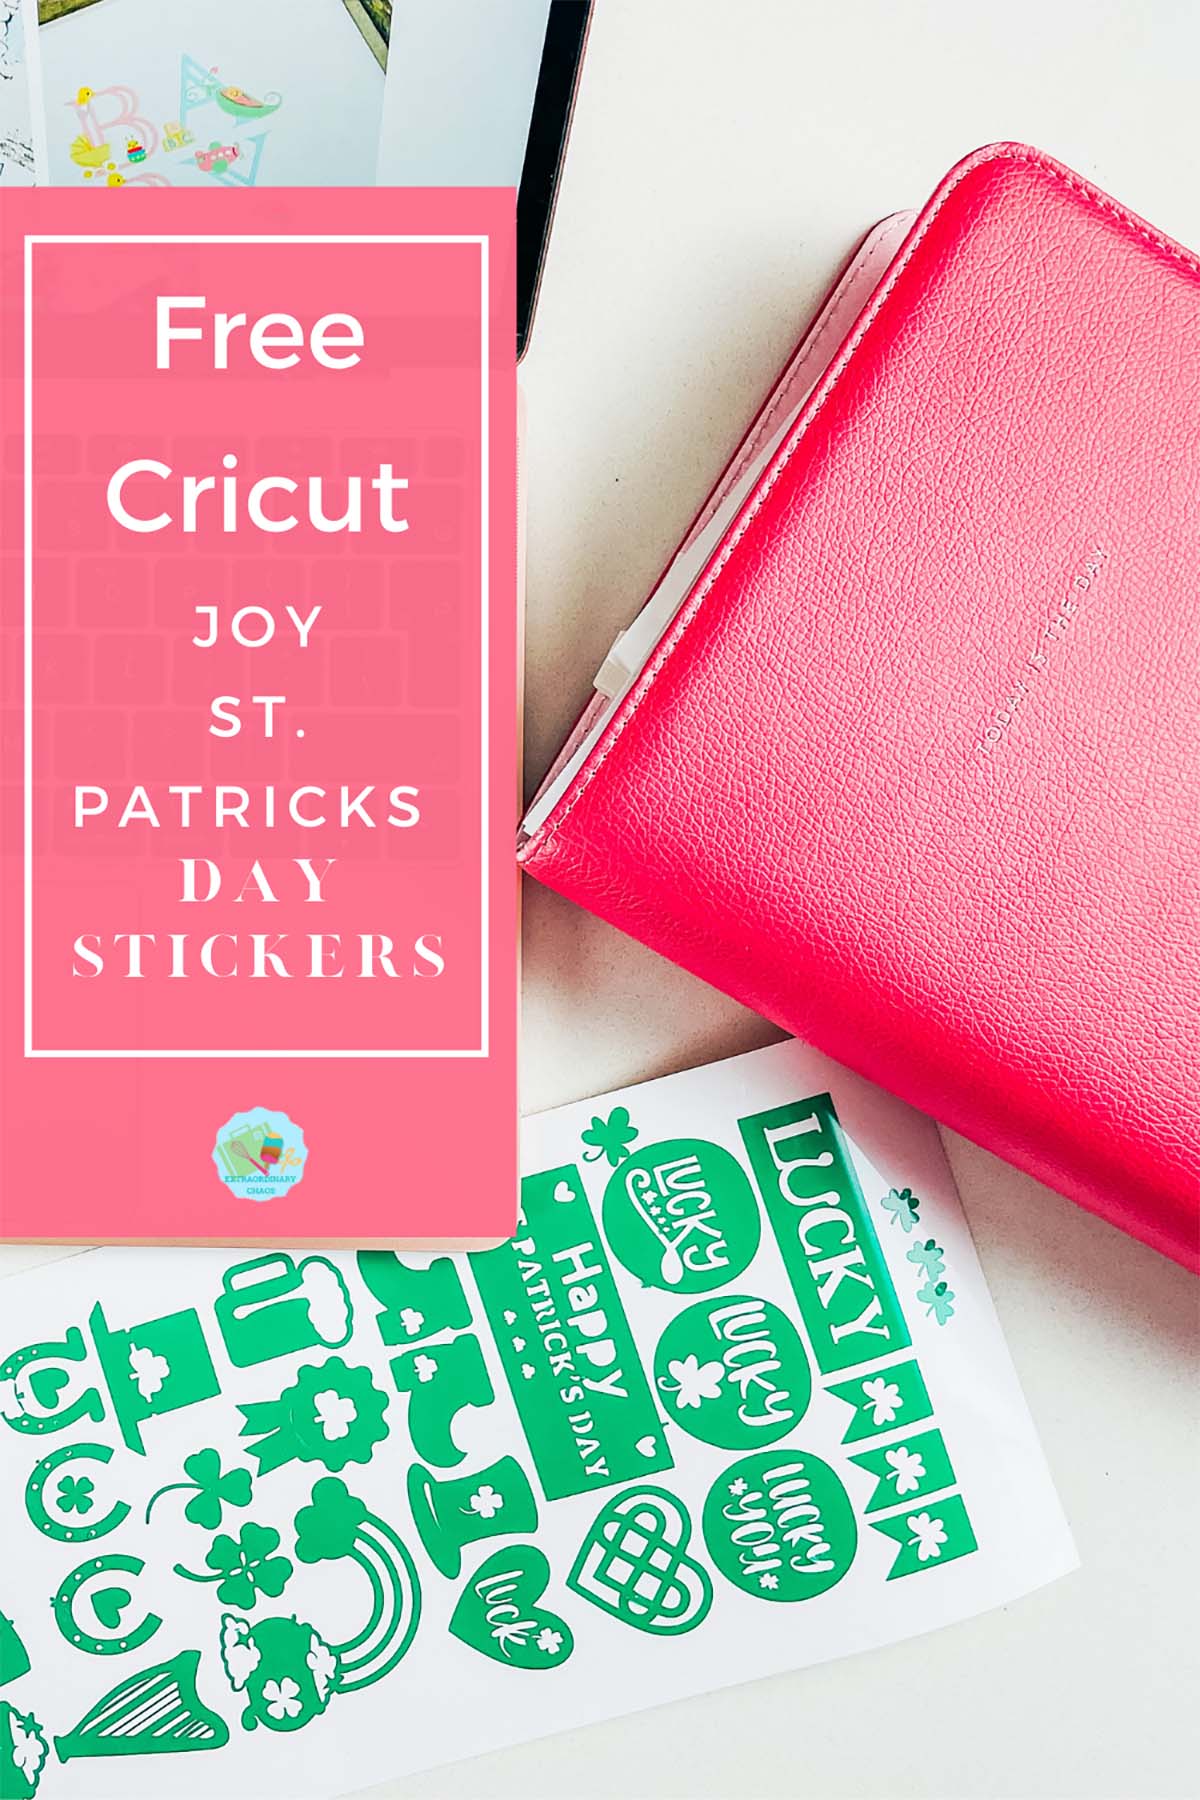 Free download for a Cricut Joy St.Patricks Day Stickers